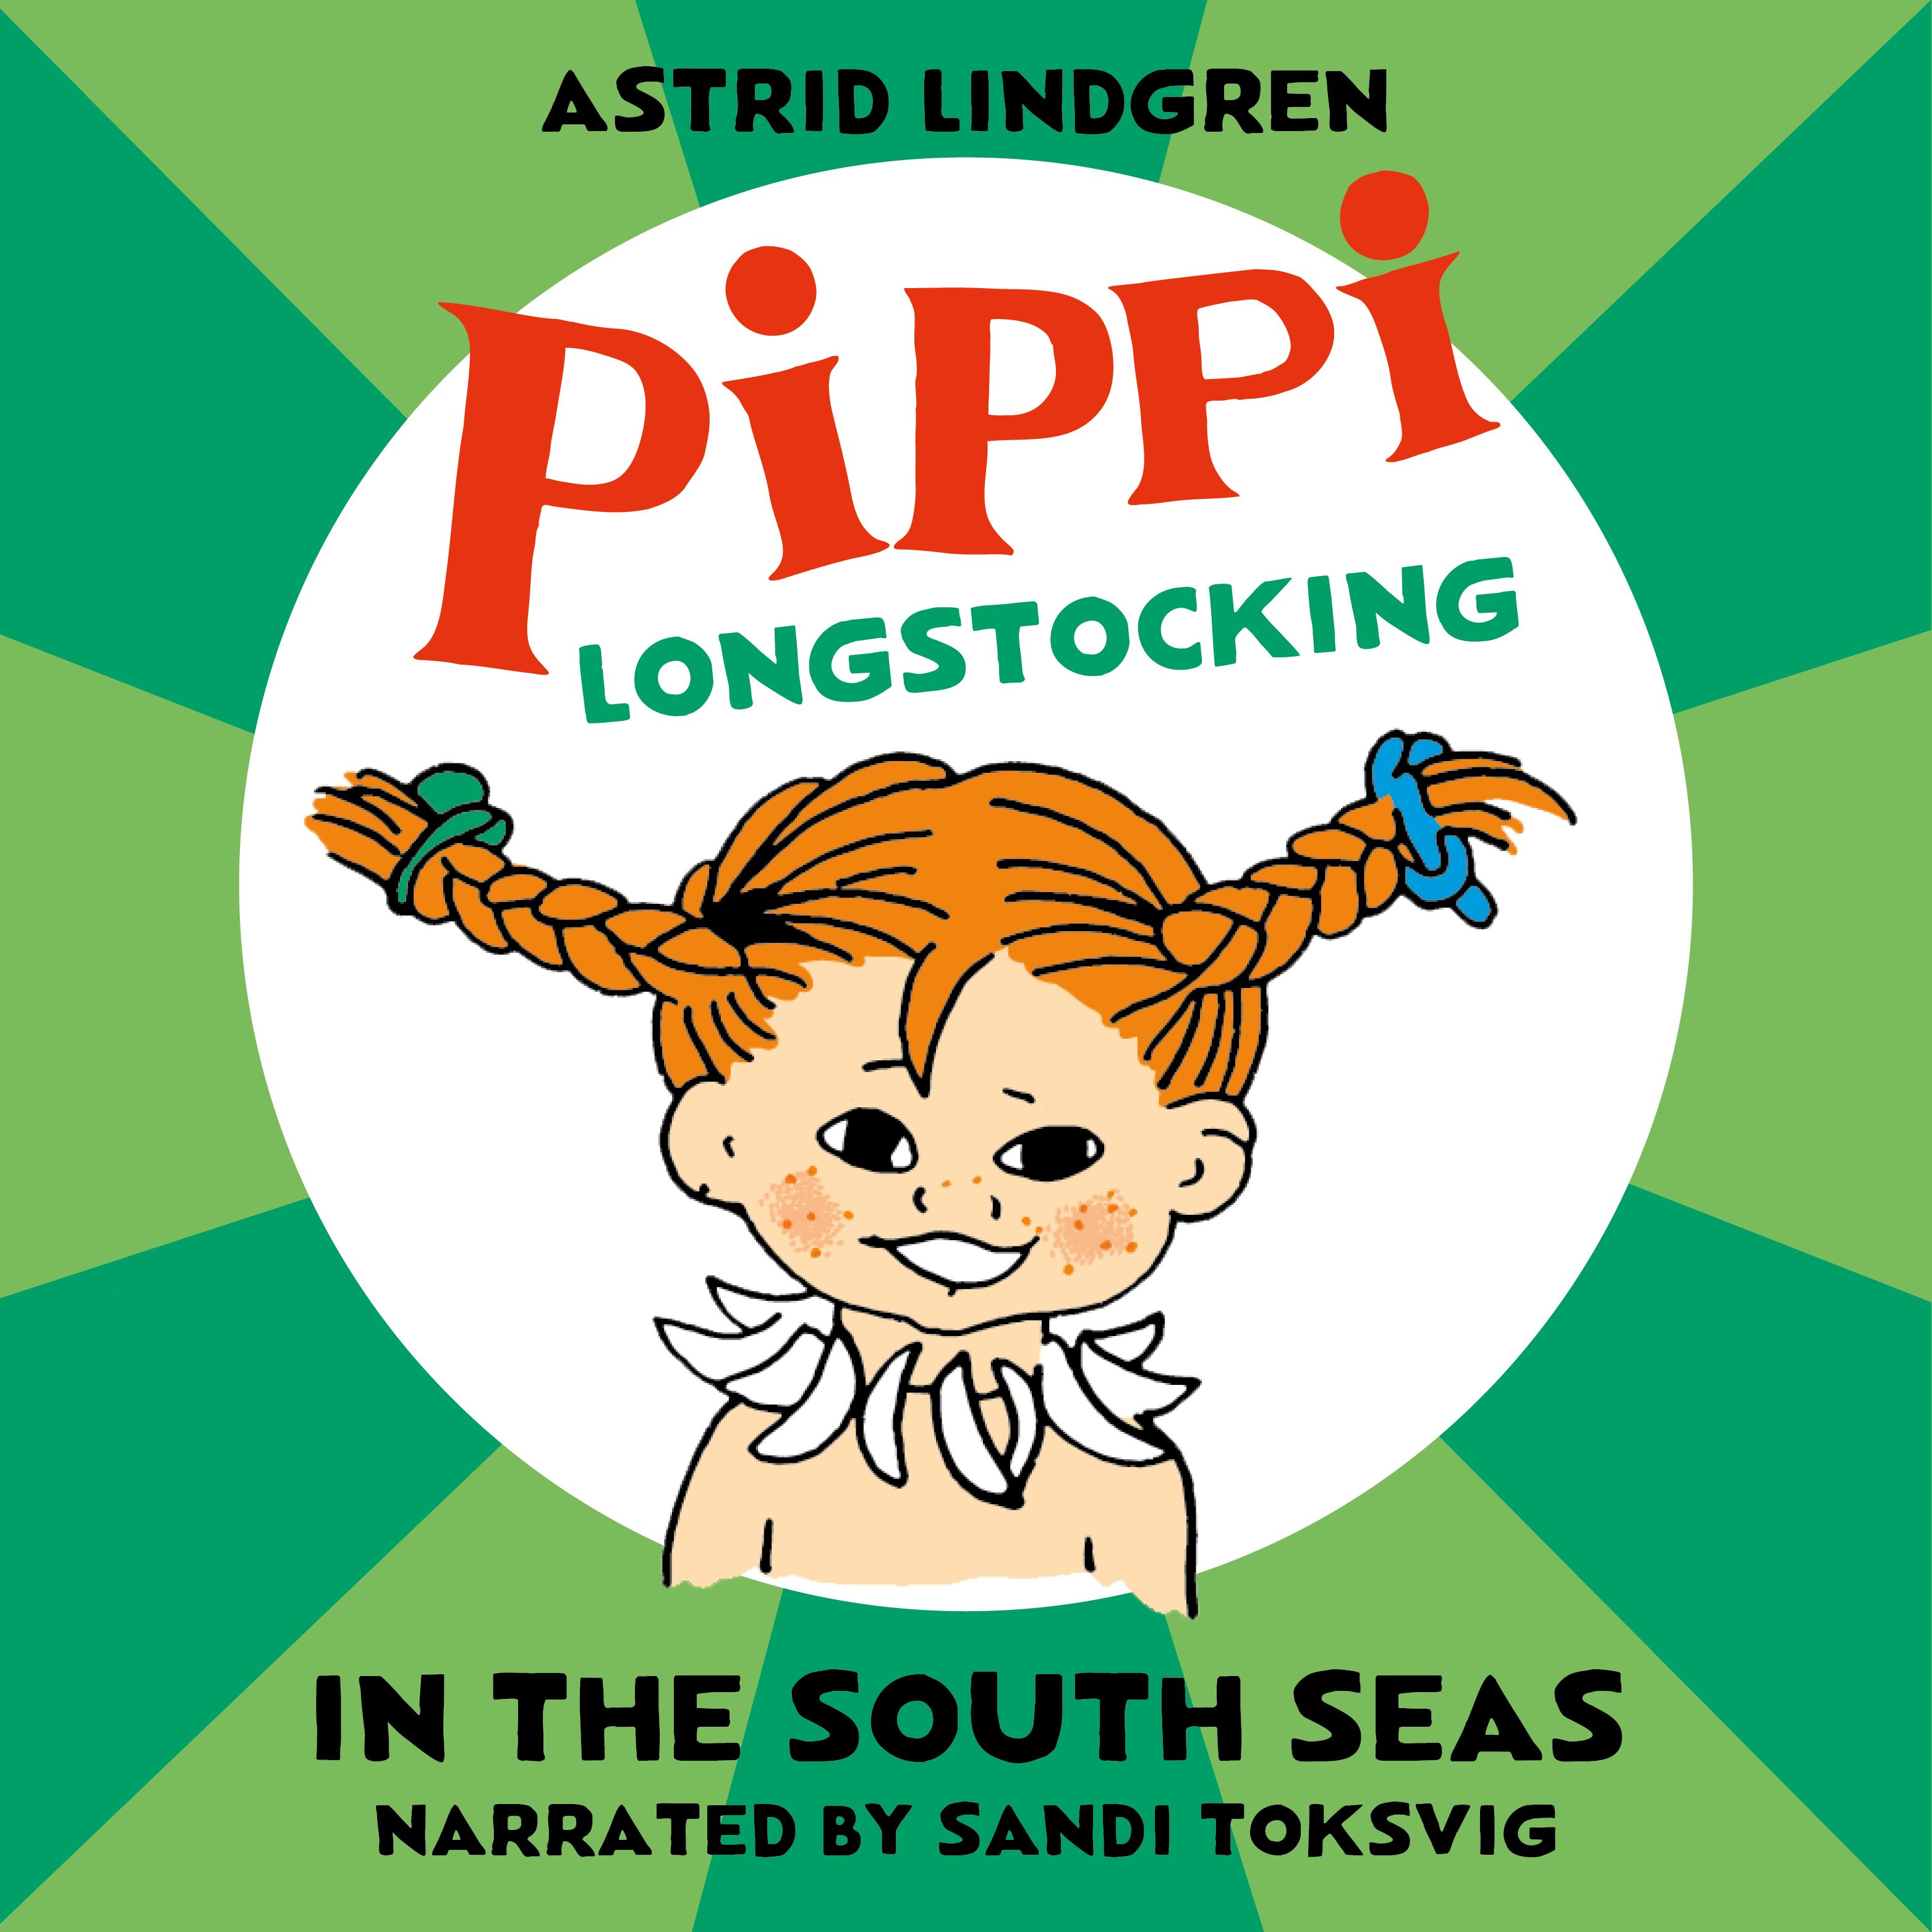 Pippi Longstocking in the South Seas, audiobook by Astrid Lindgren